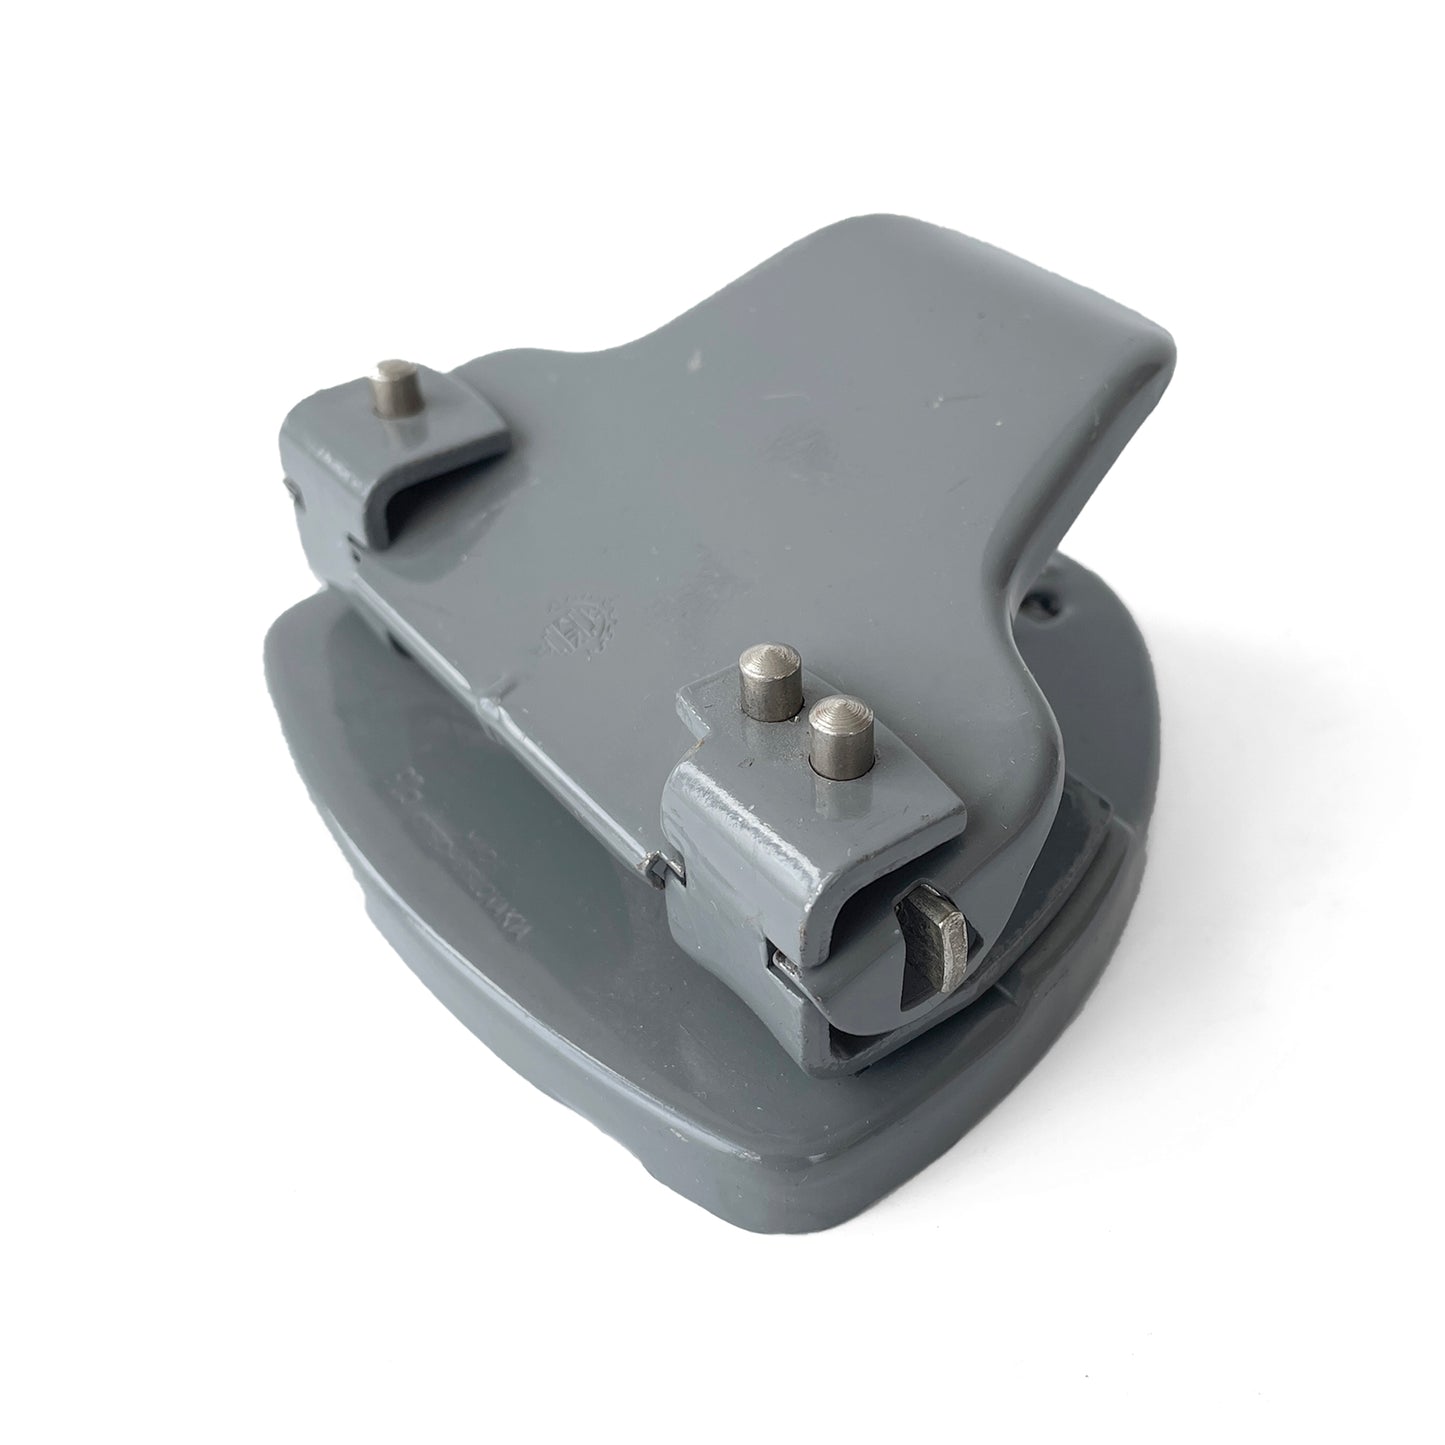 Vintage Hole-Punch Made in Czechoslovakia – Grey